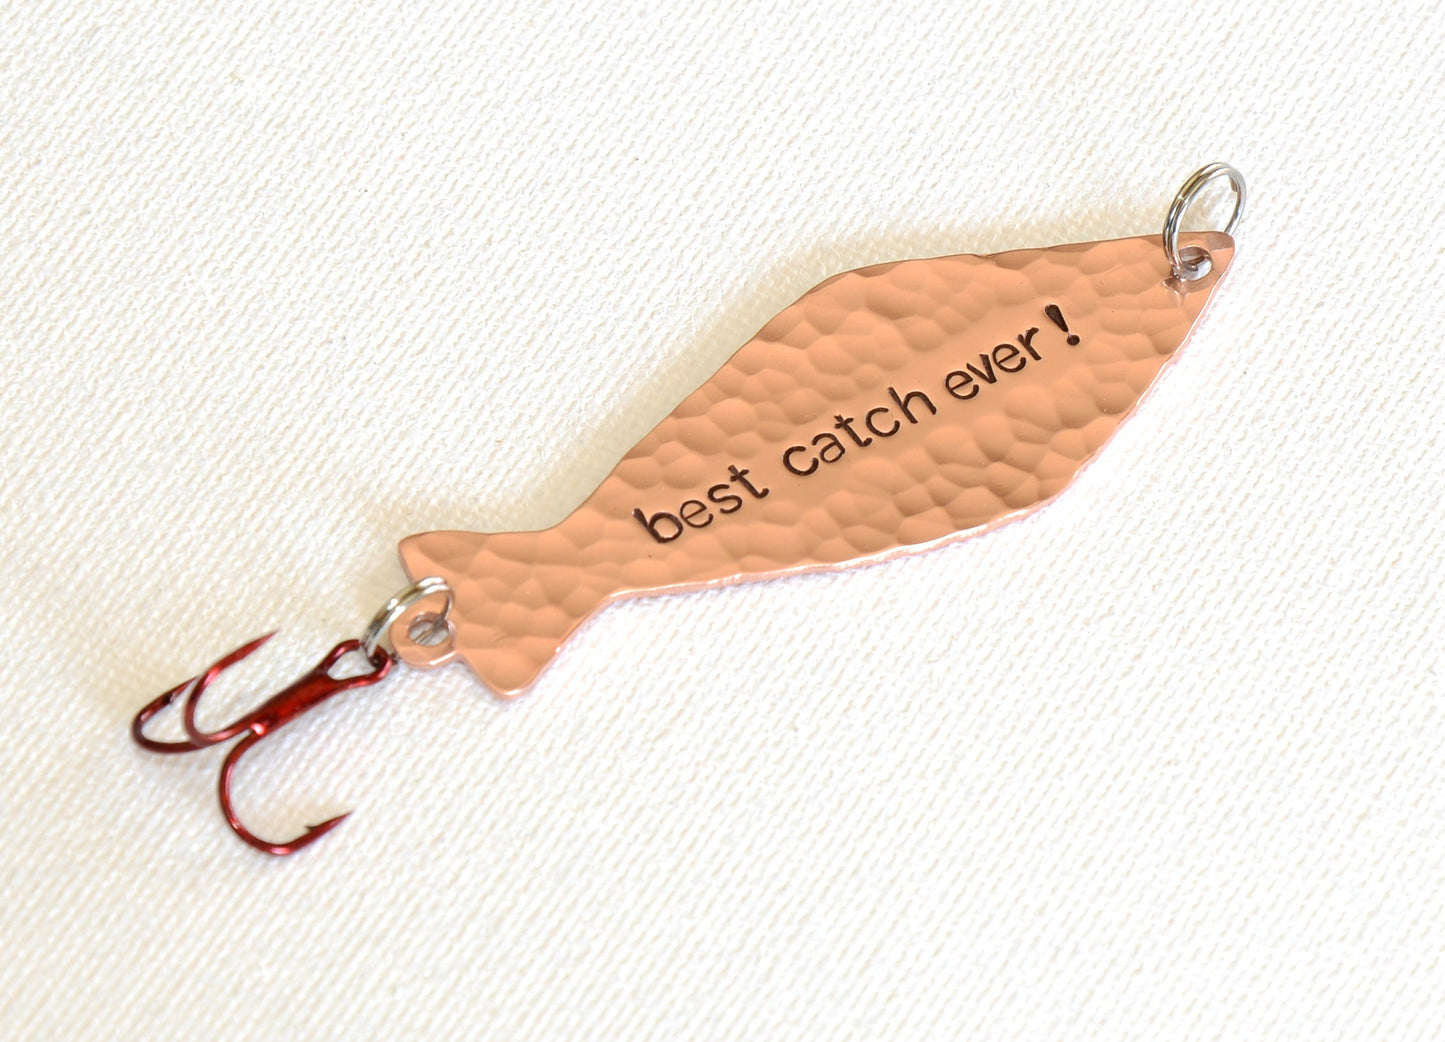 Copper Fishing Lure with Best Catch Ever